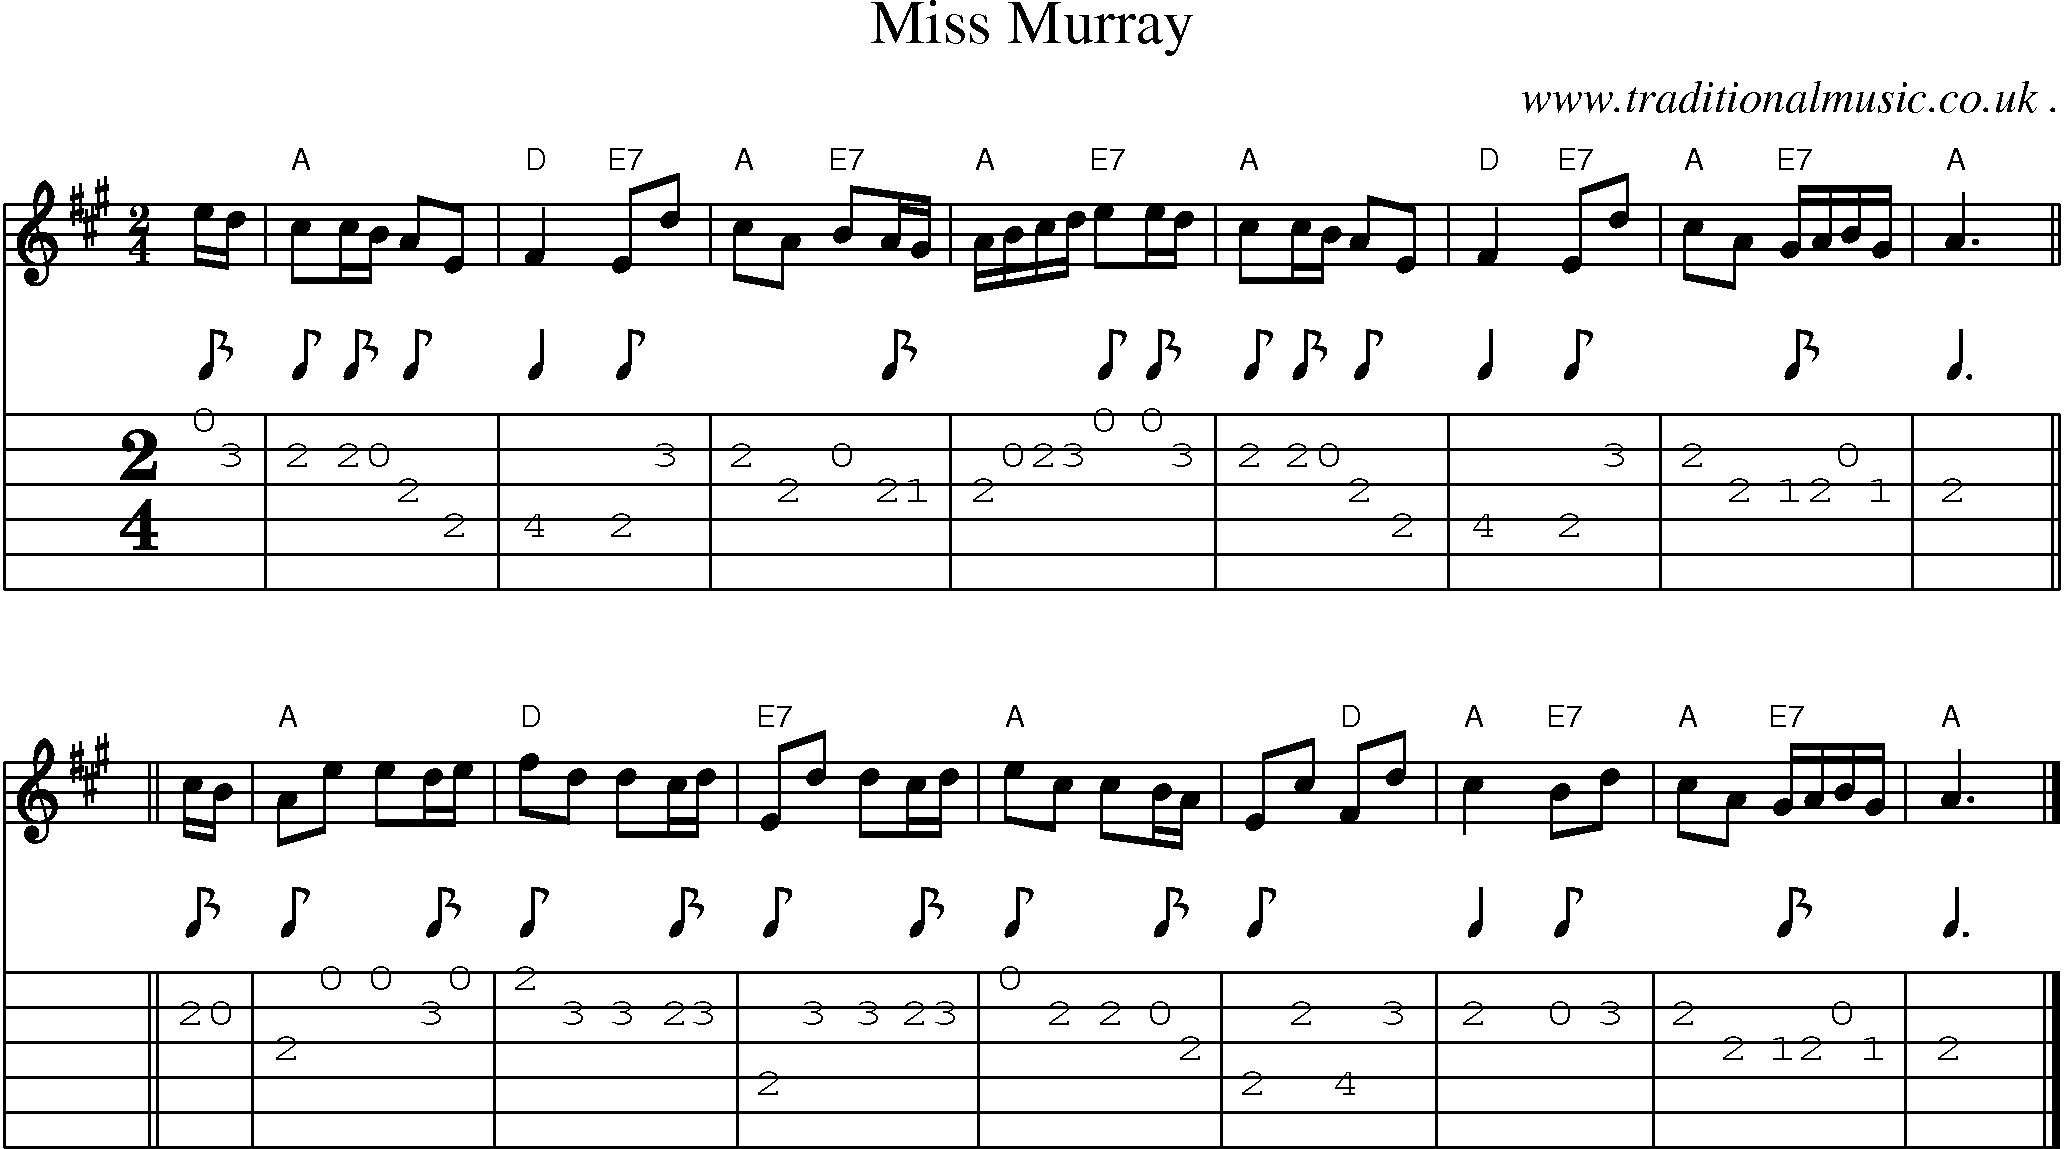 Sheet-music  score, Chords and Guitar Tabs for Miss Murray